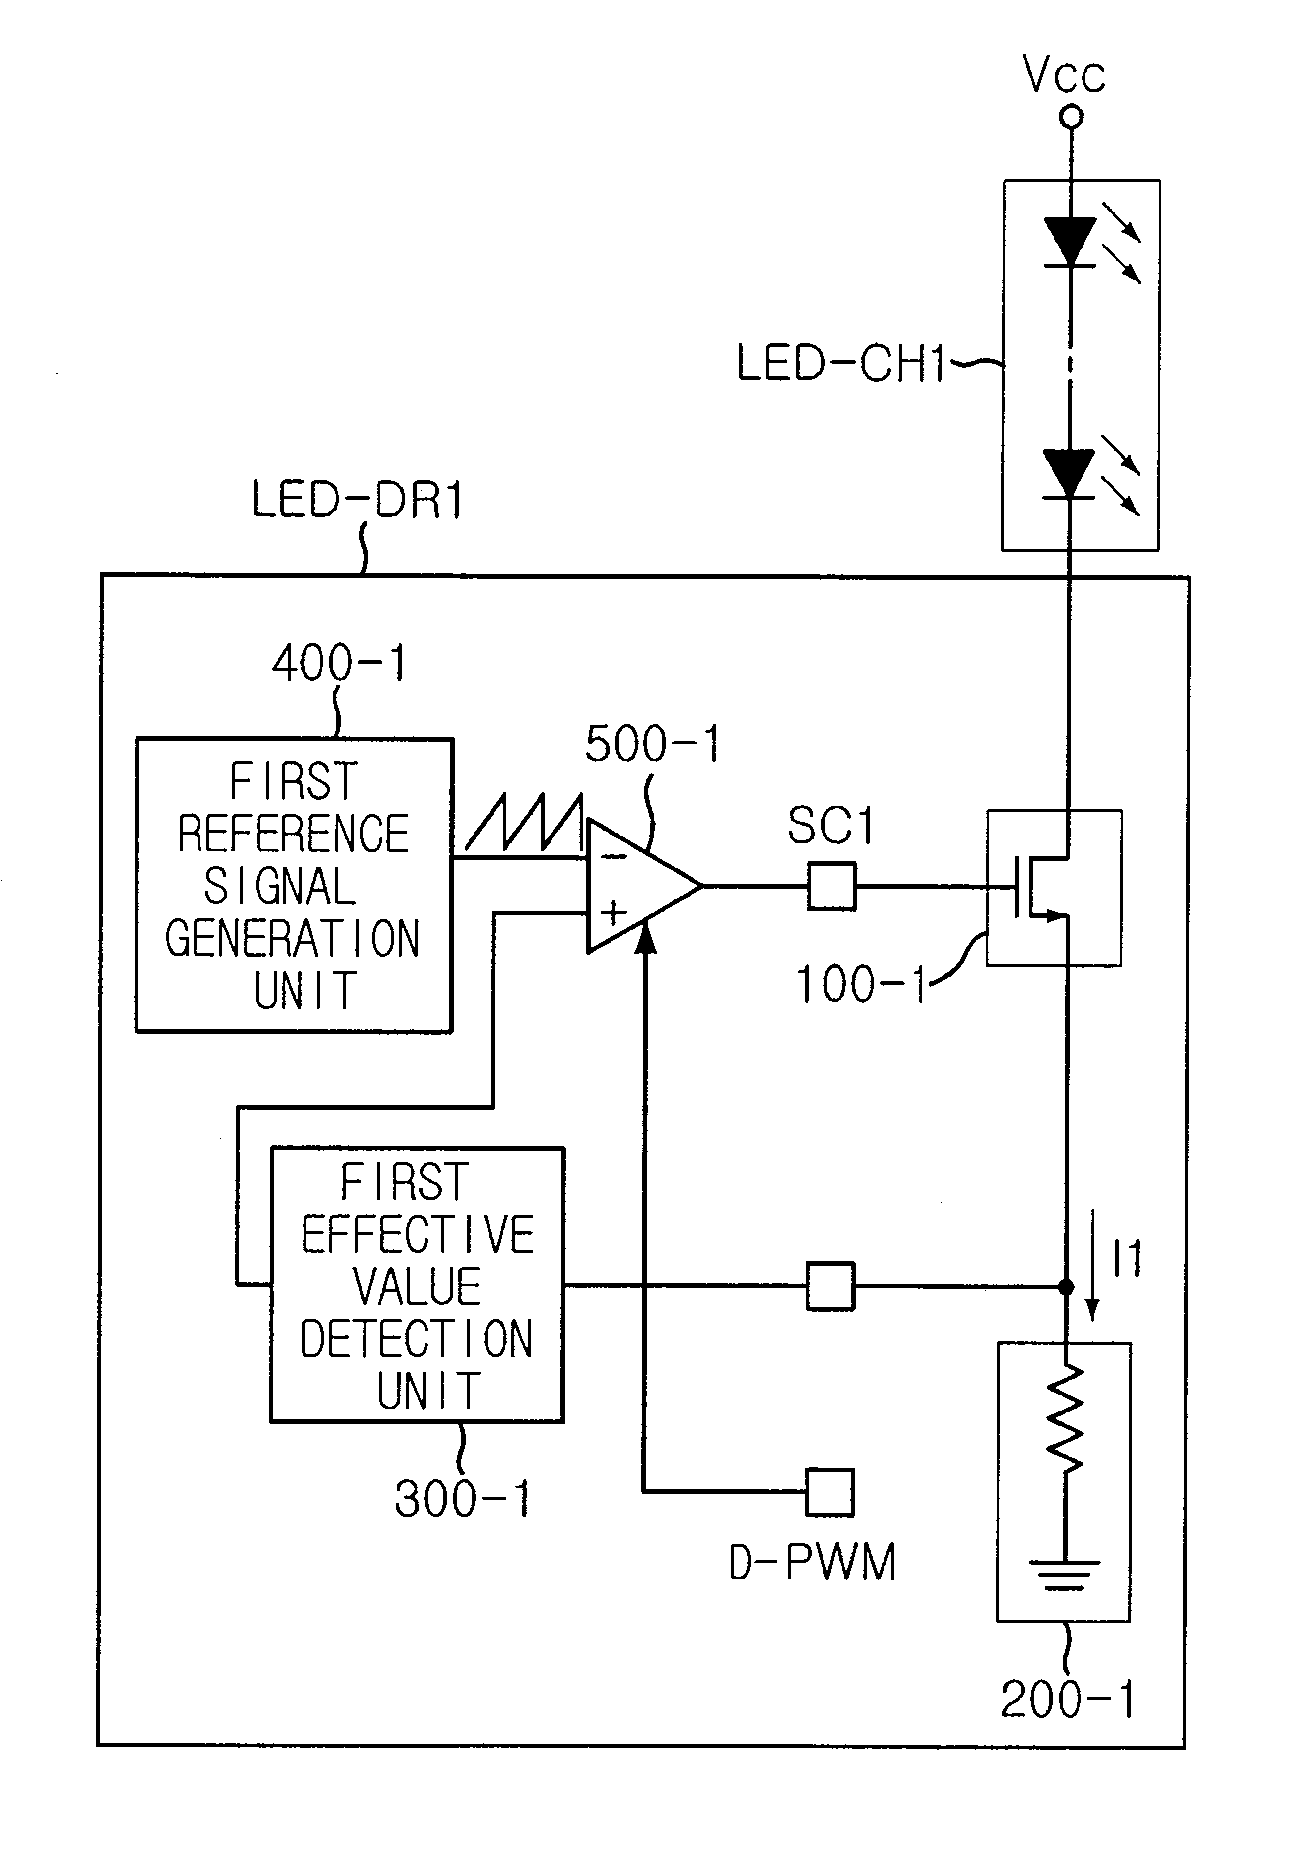 Apparatus for driving light emitting device using pulse-width modulation